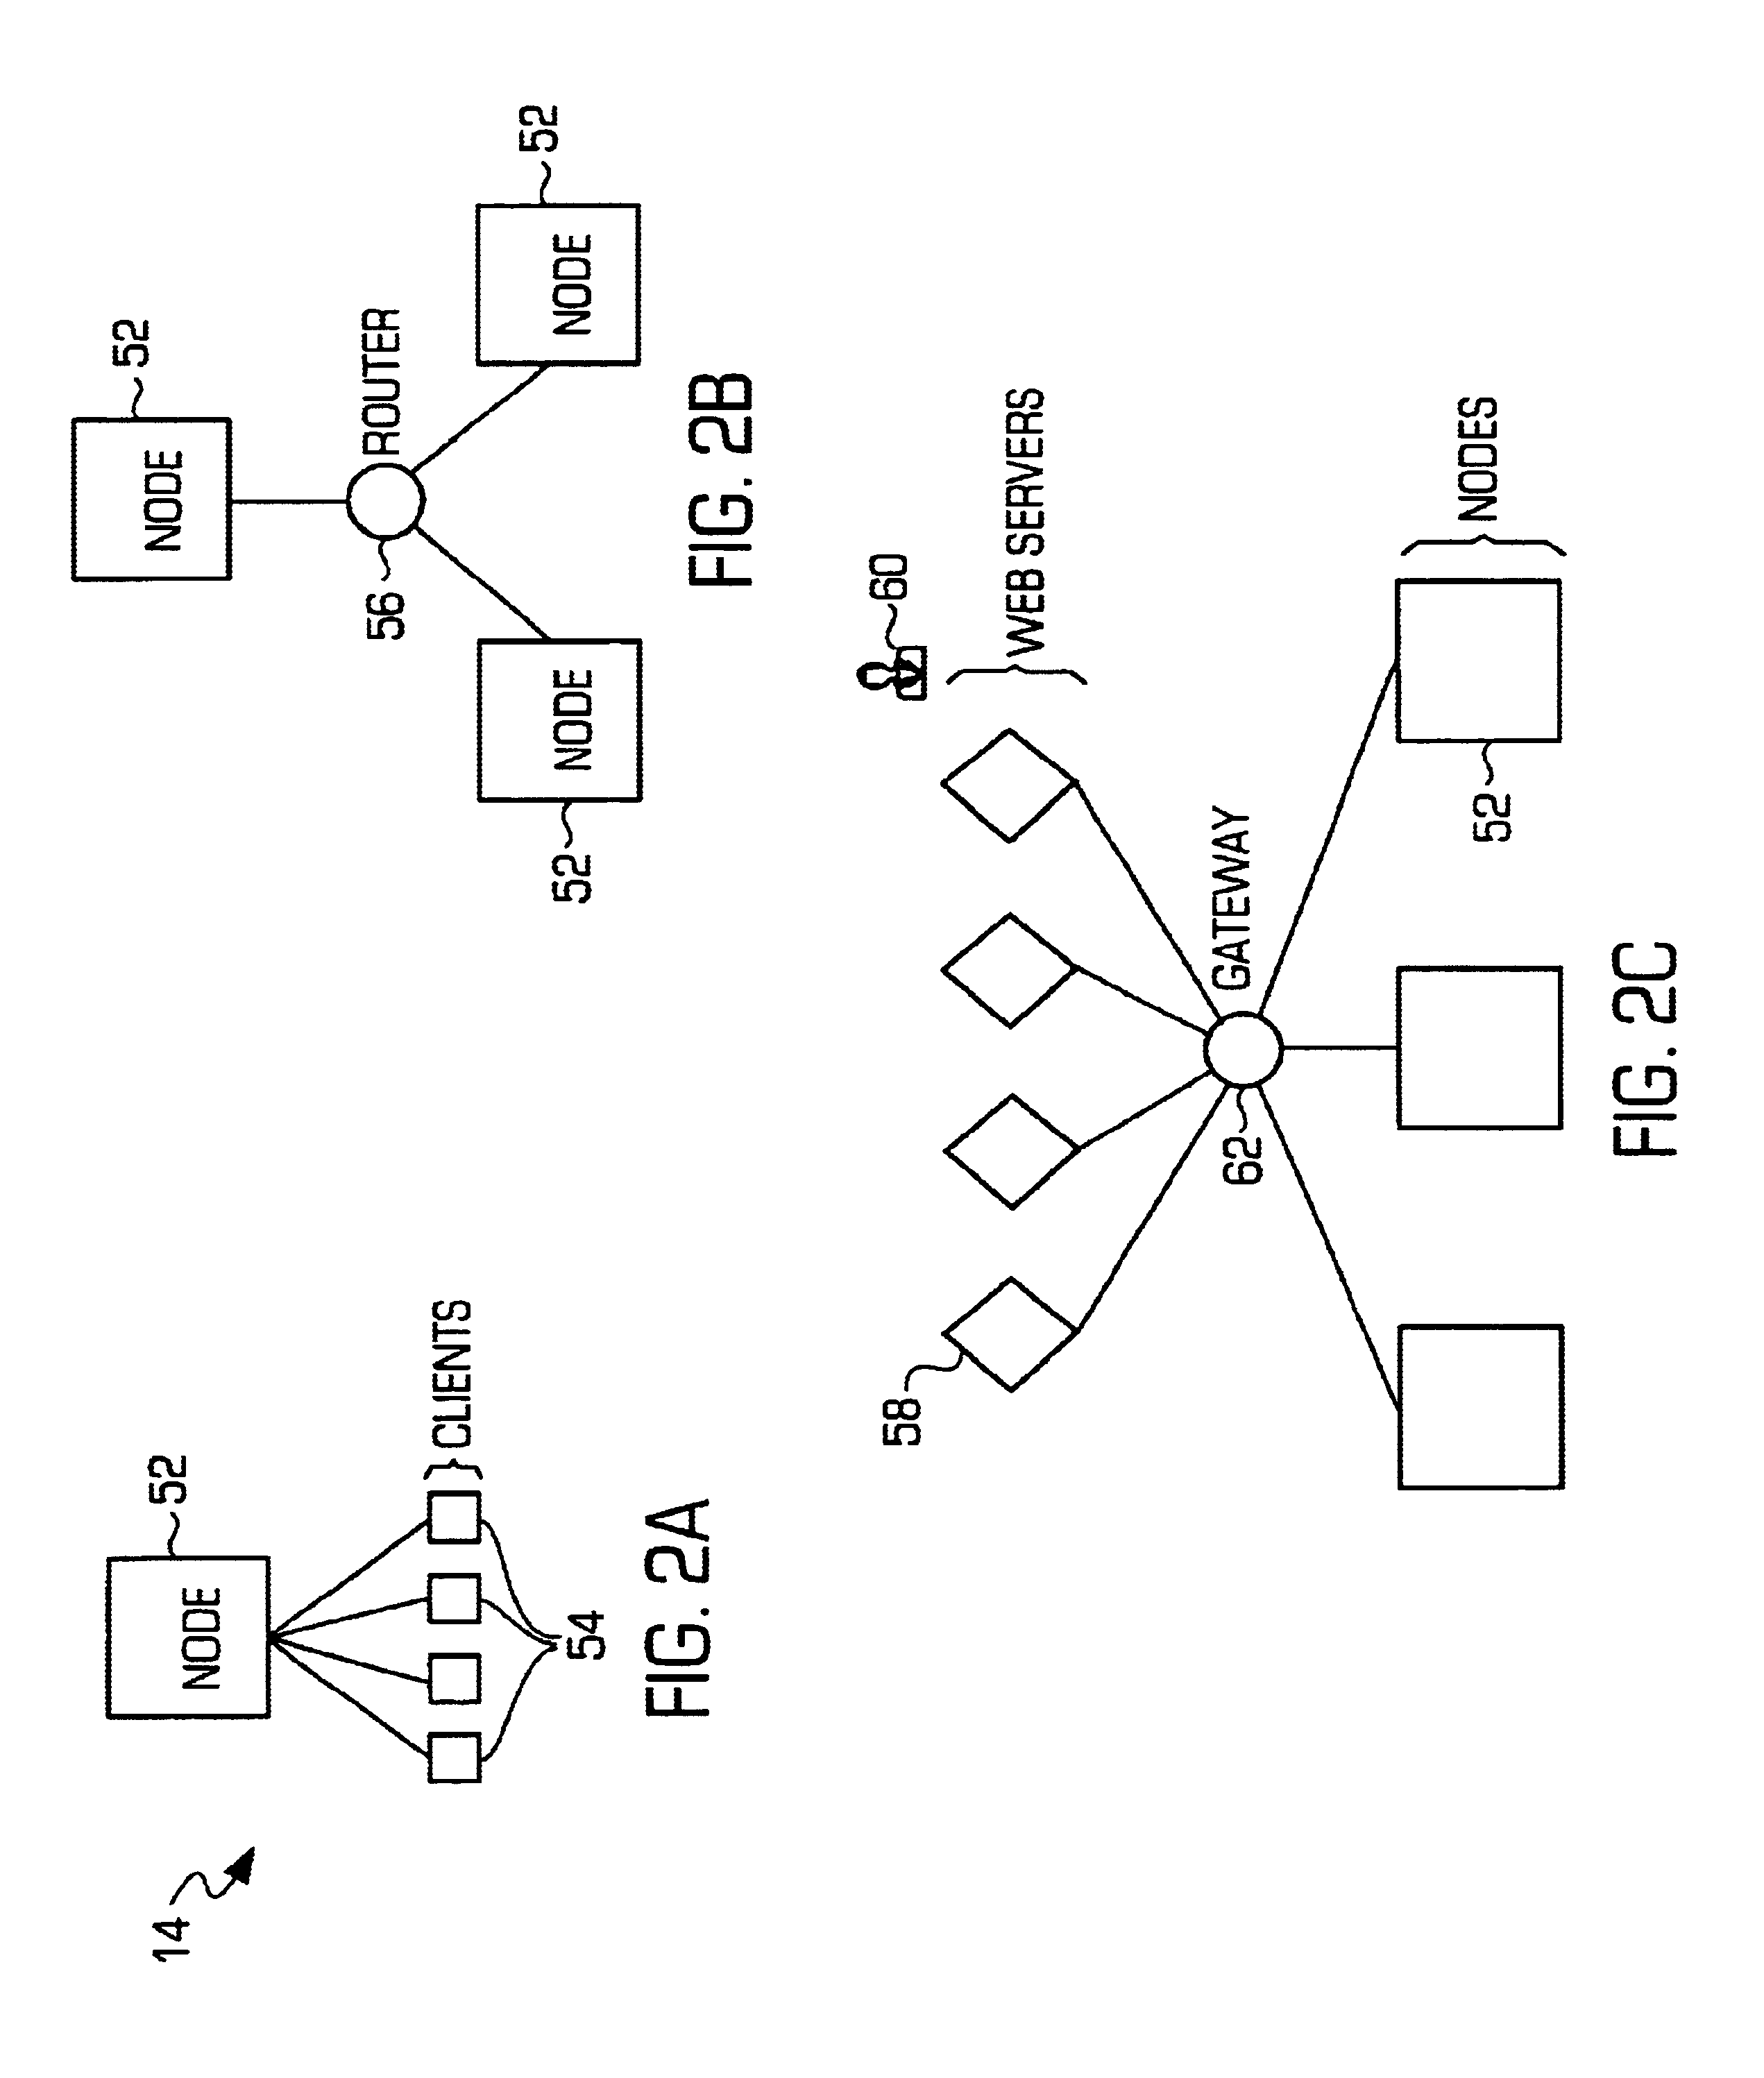 System and method for enabling file transfers executed in a network environment by a software program